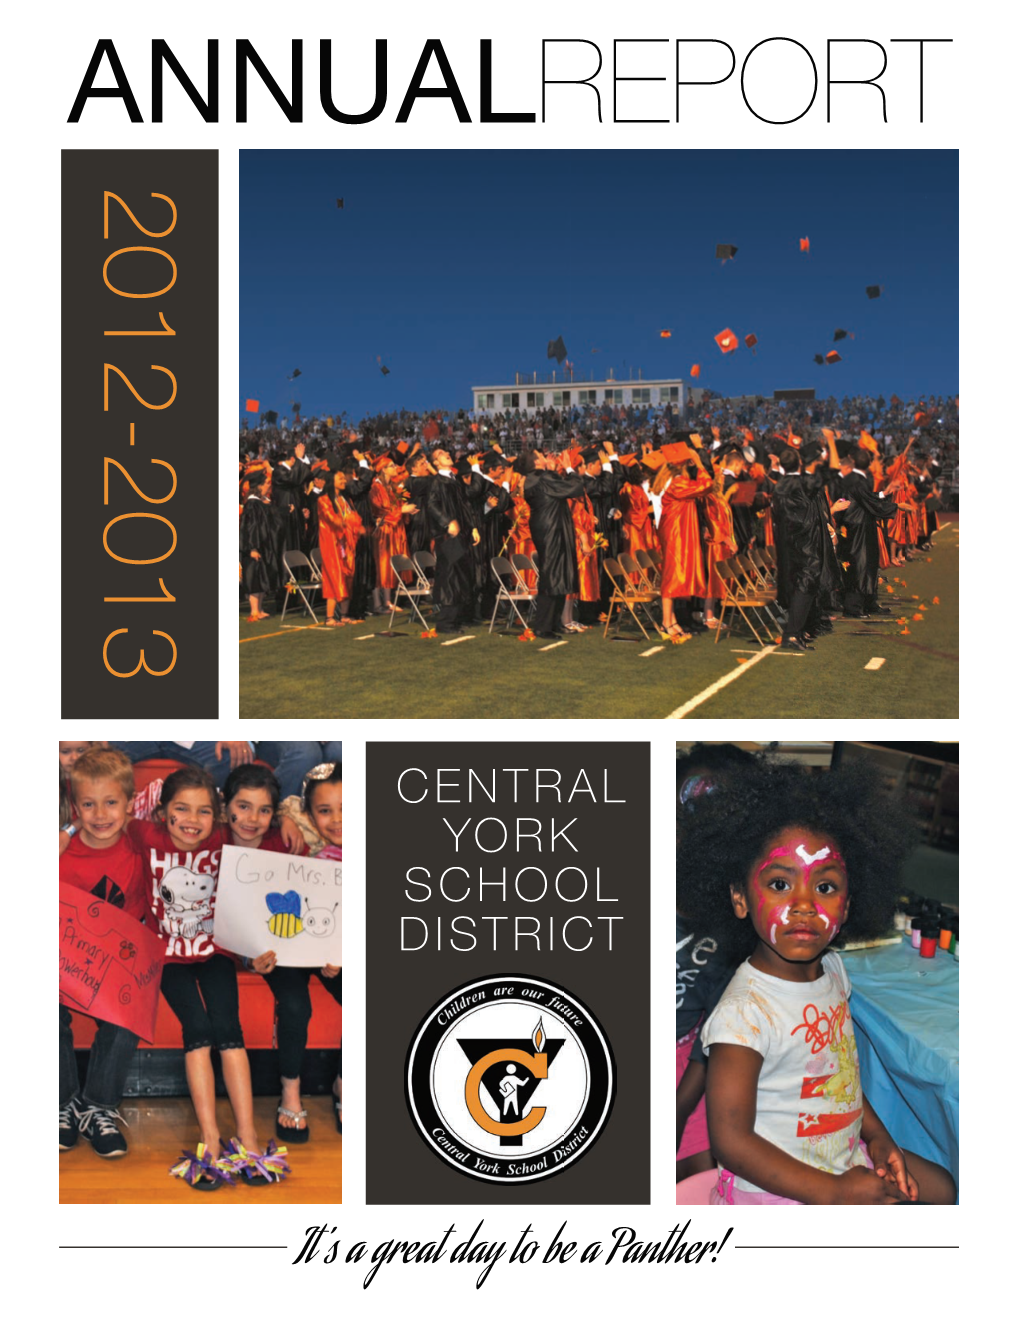 CENTRAL YORK SCHOOL DISTRICT It's a Great Day to Be a Panther!